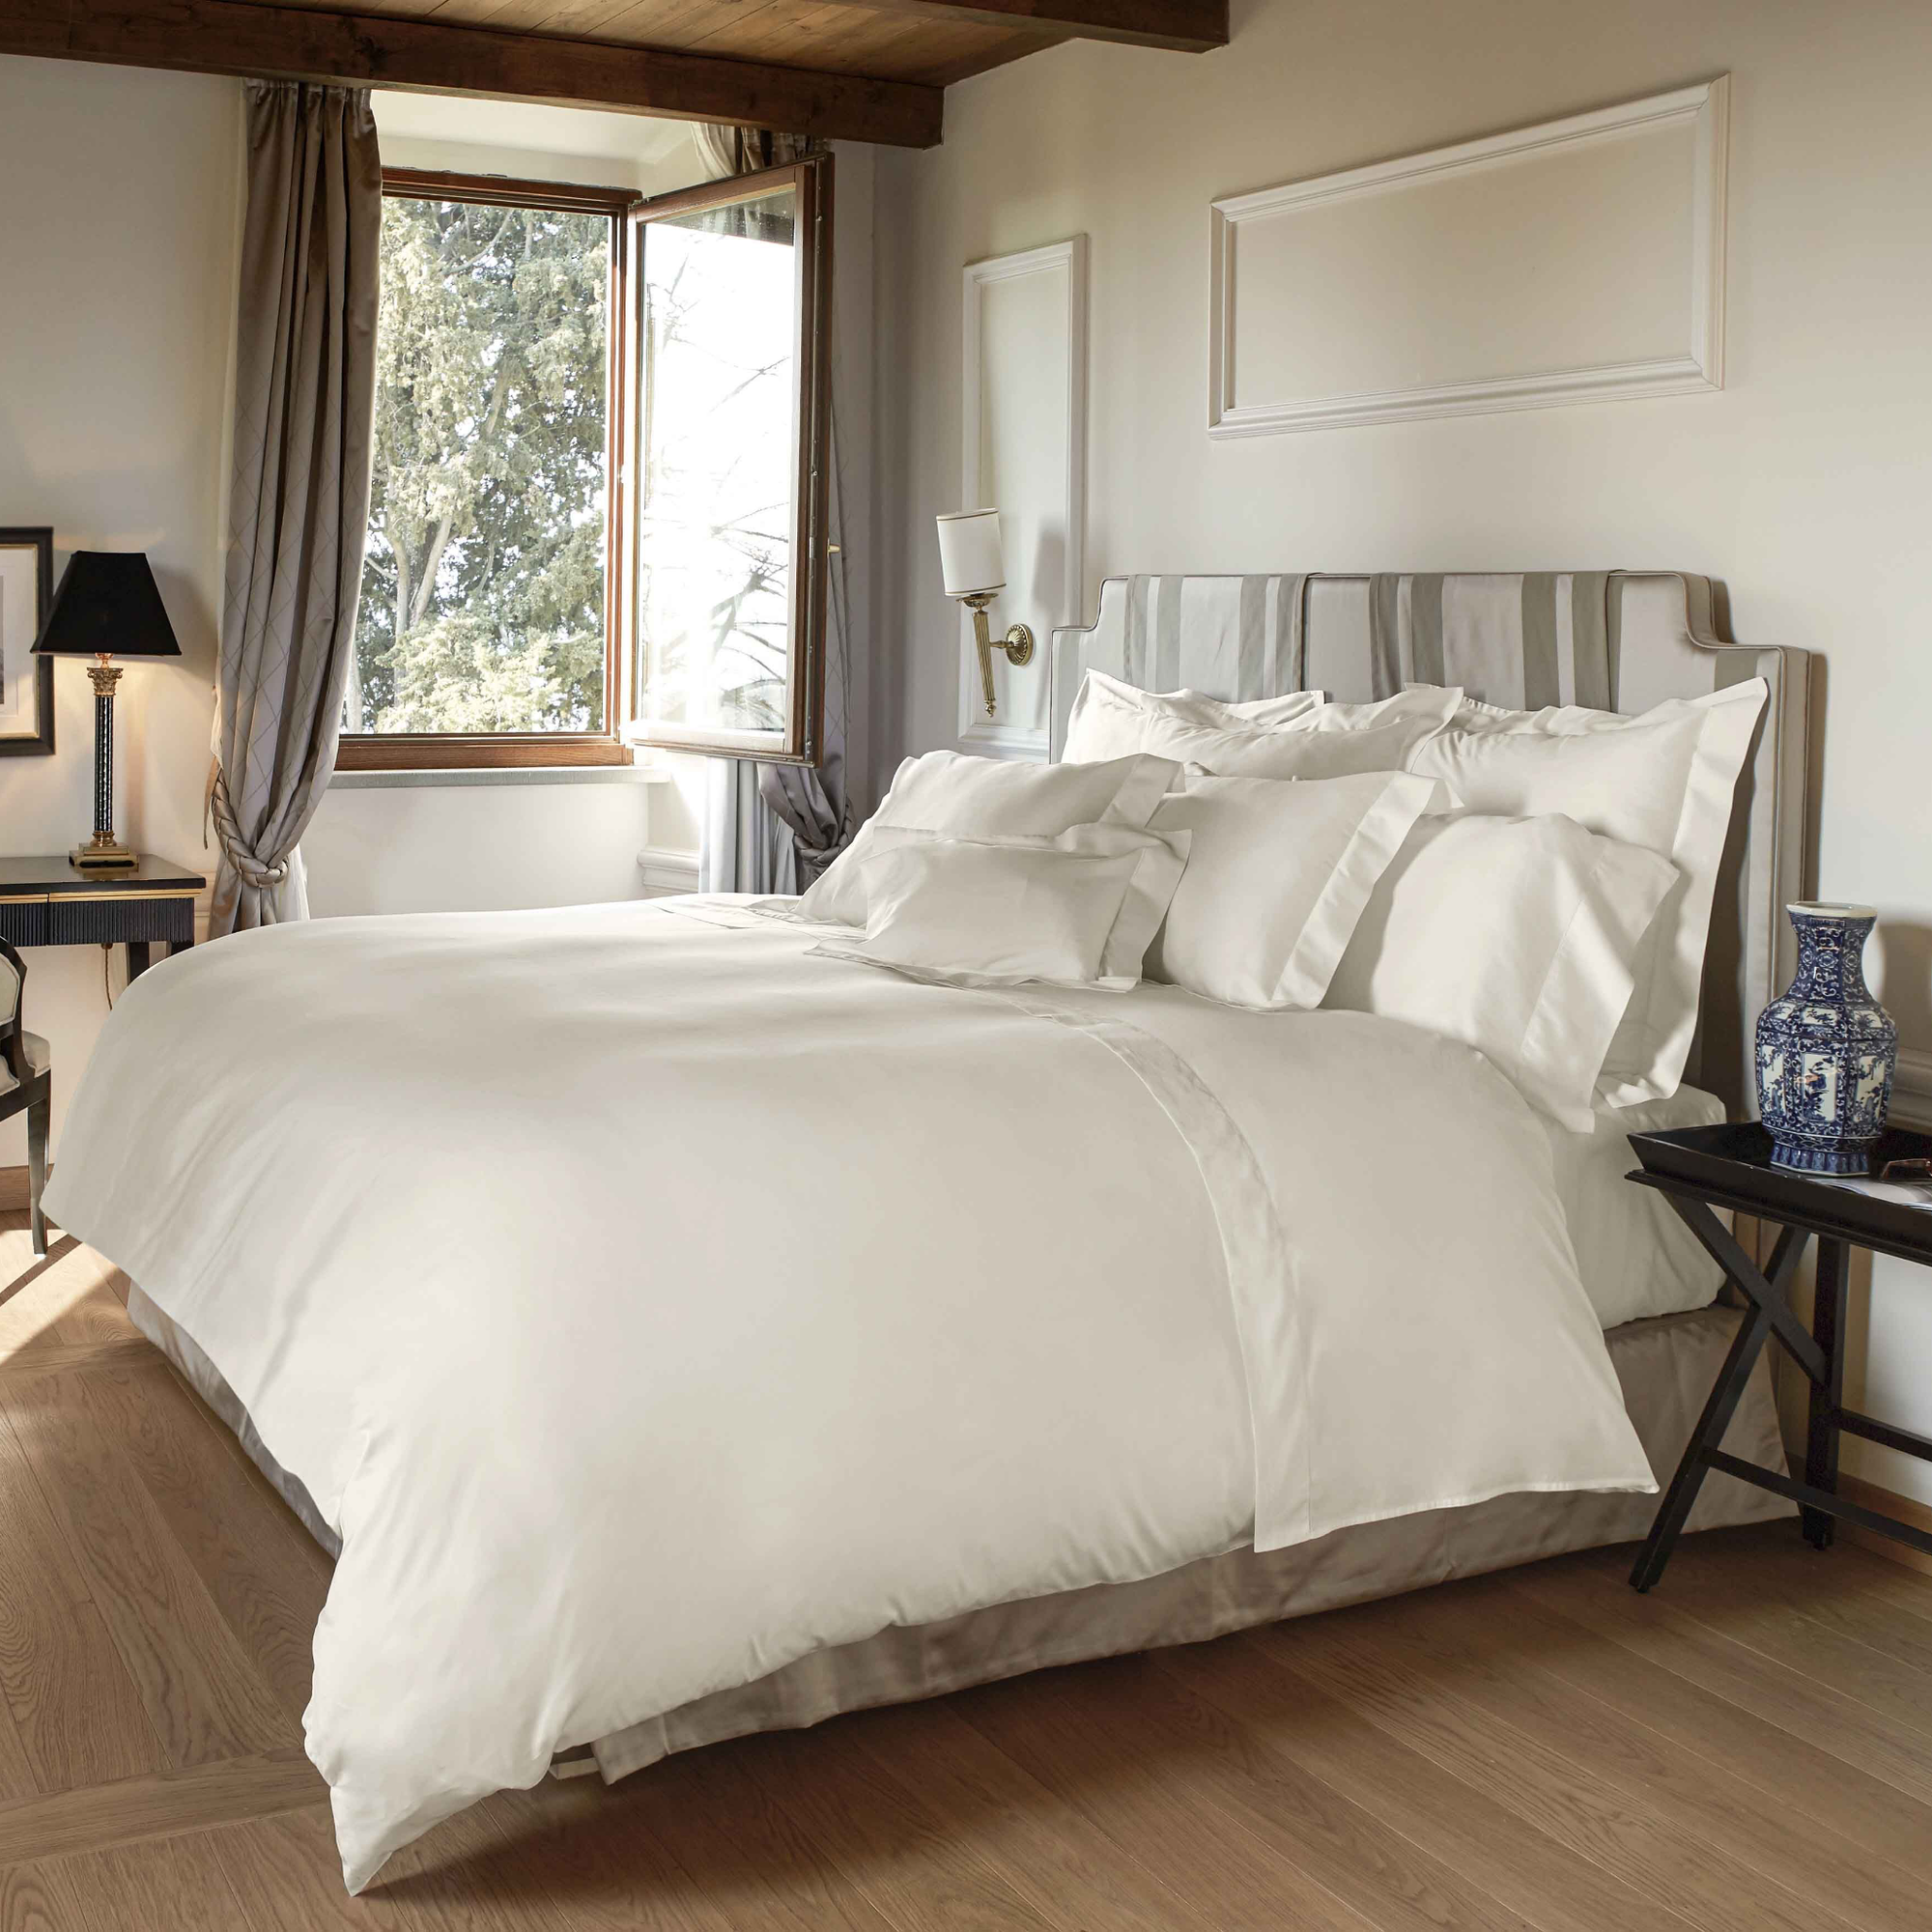 Full Bed Dressed in Signoria Nuvola Bedding in Ivory Color